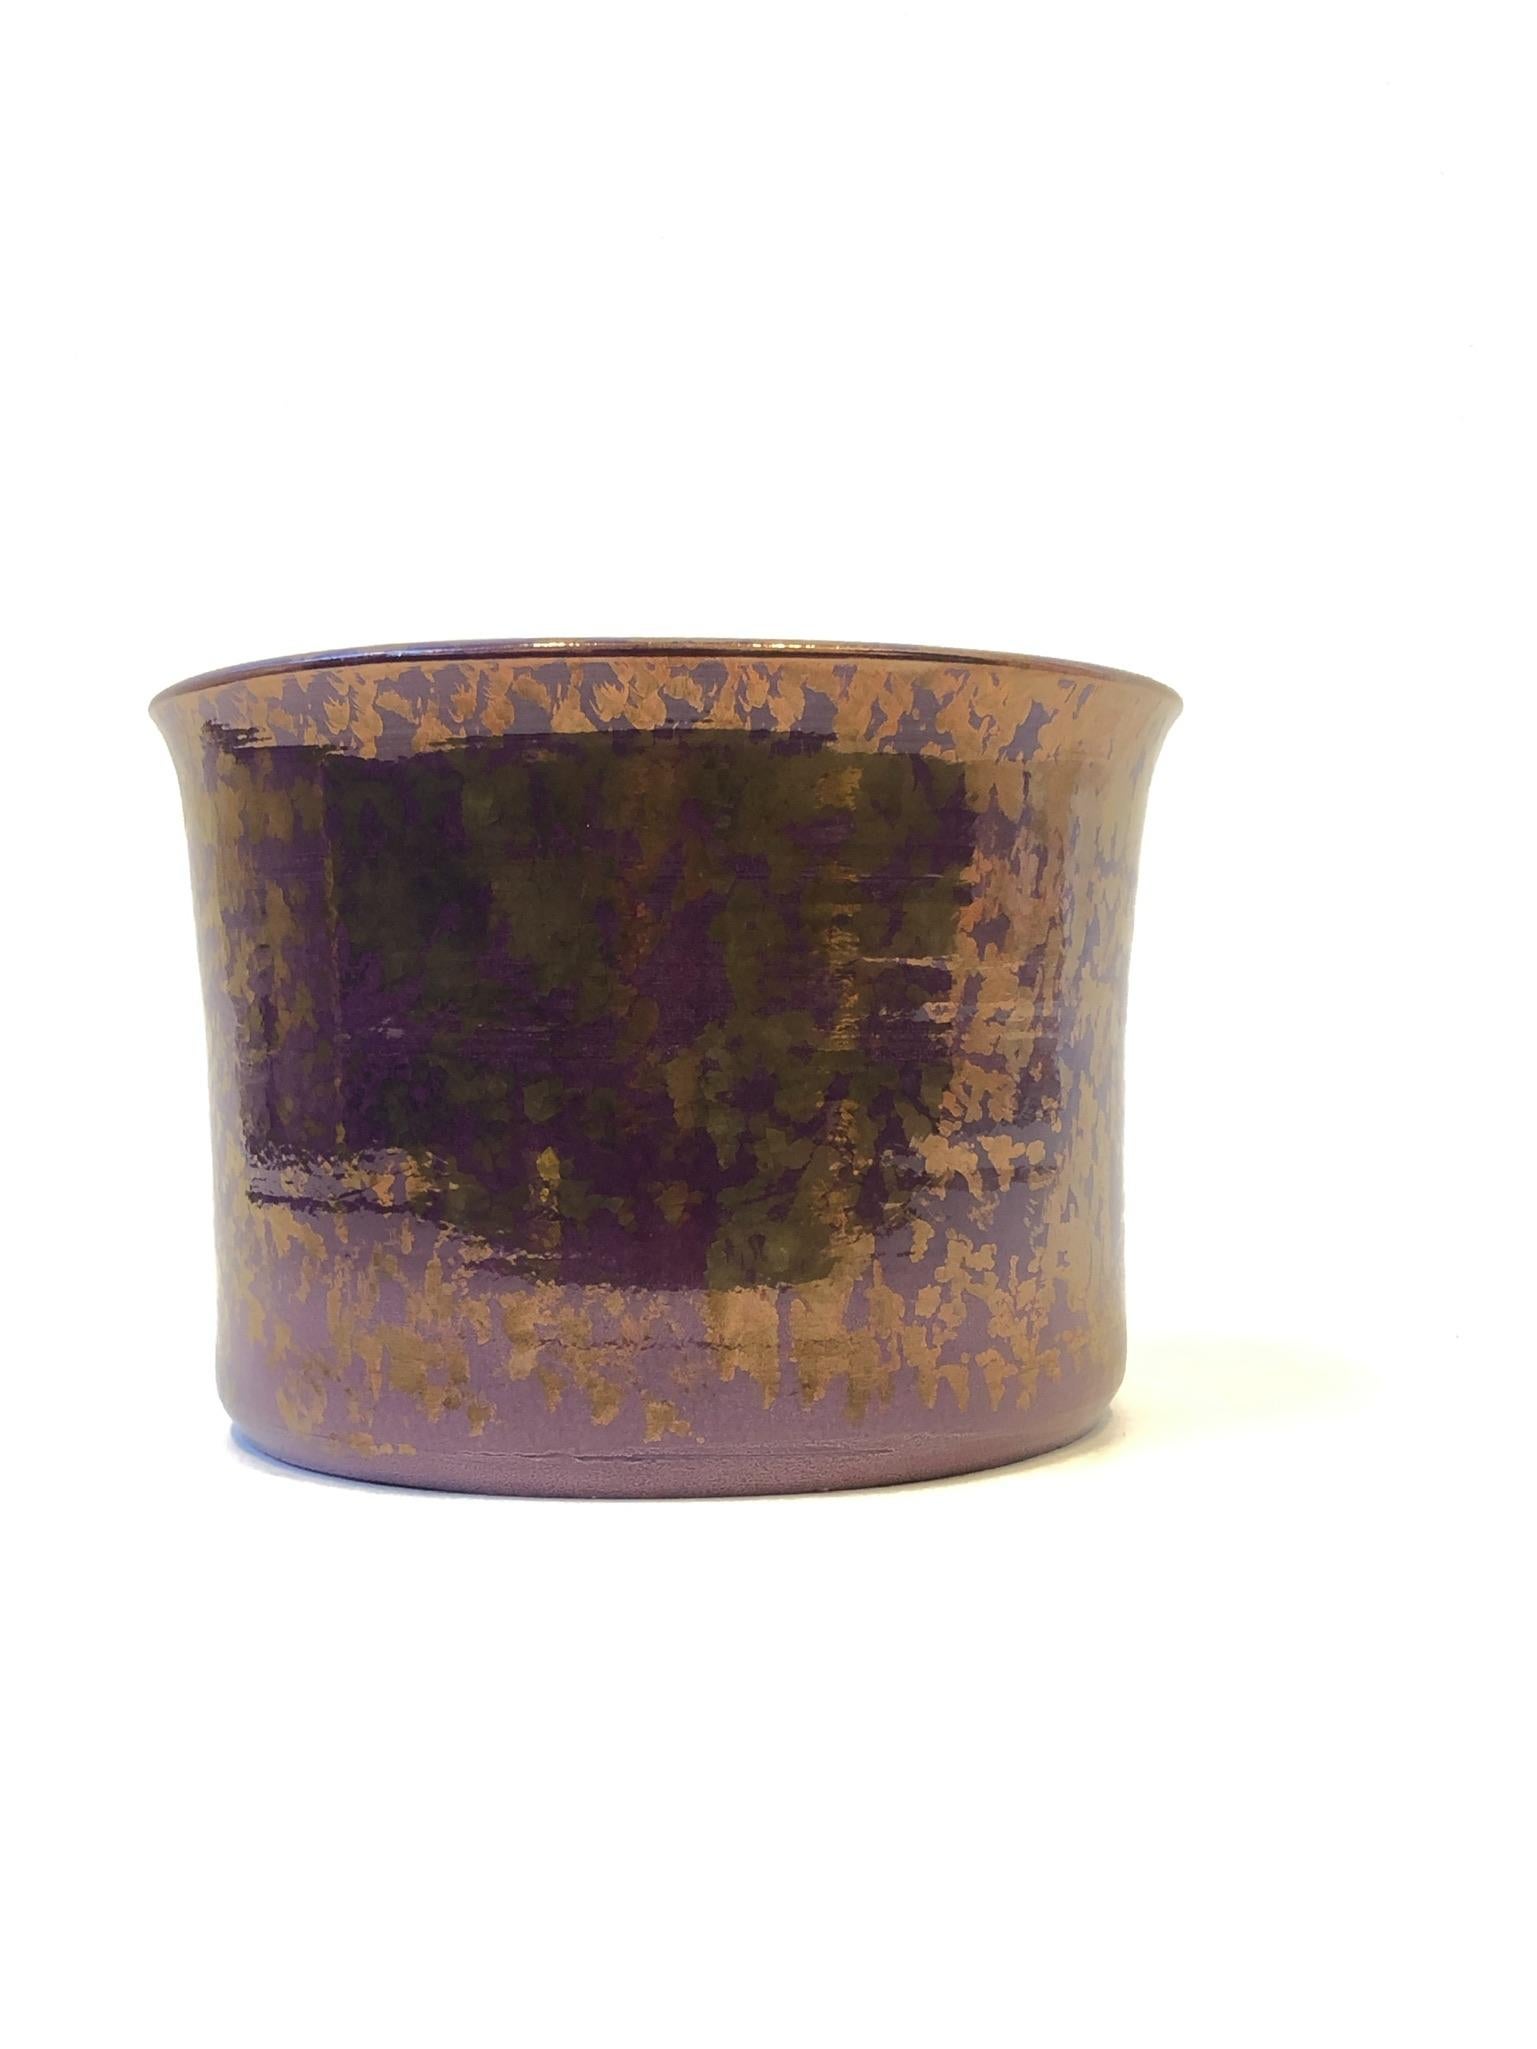 1980s Studio ceramic planter or cachepot with purple and copper glazing by Gary McCloy for Steve Chase. Hand signed and marked exclusively for Steve Chase. Price is just for one planter.
Measurements: 7.5 high and 11” diameter.